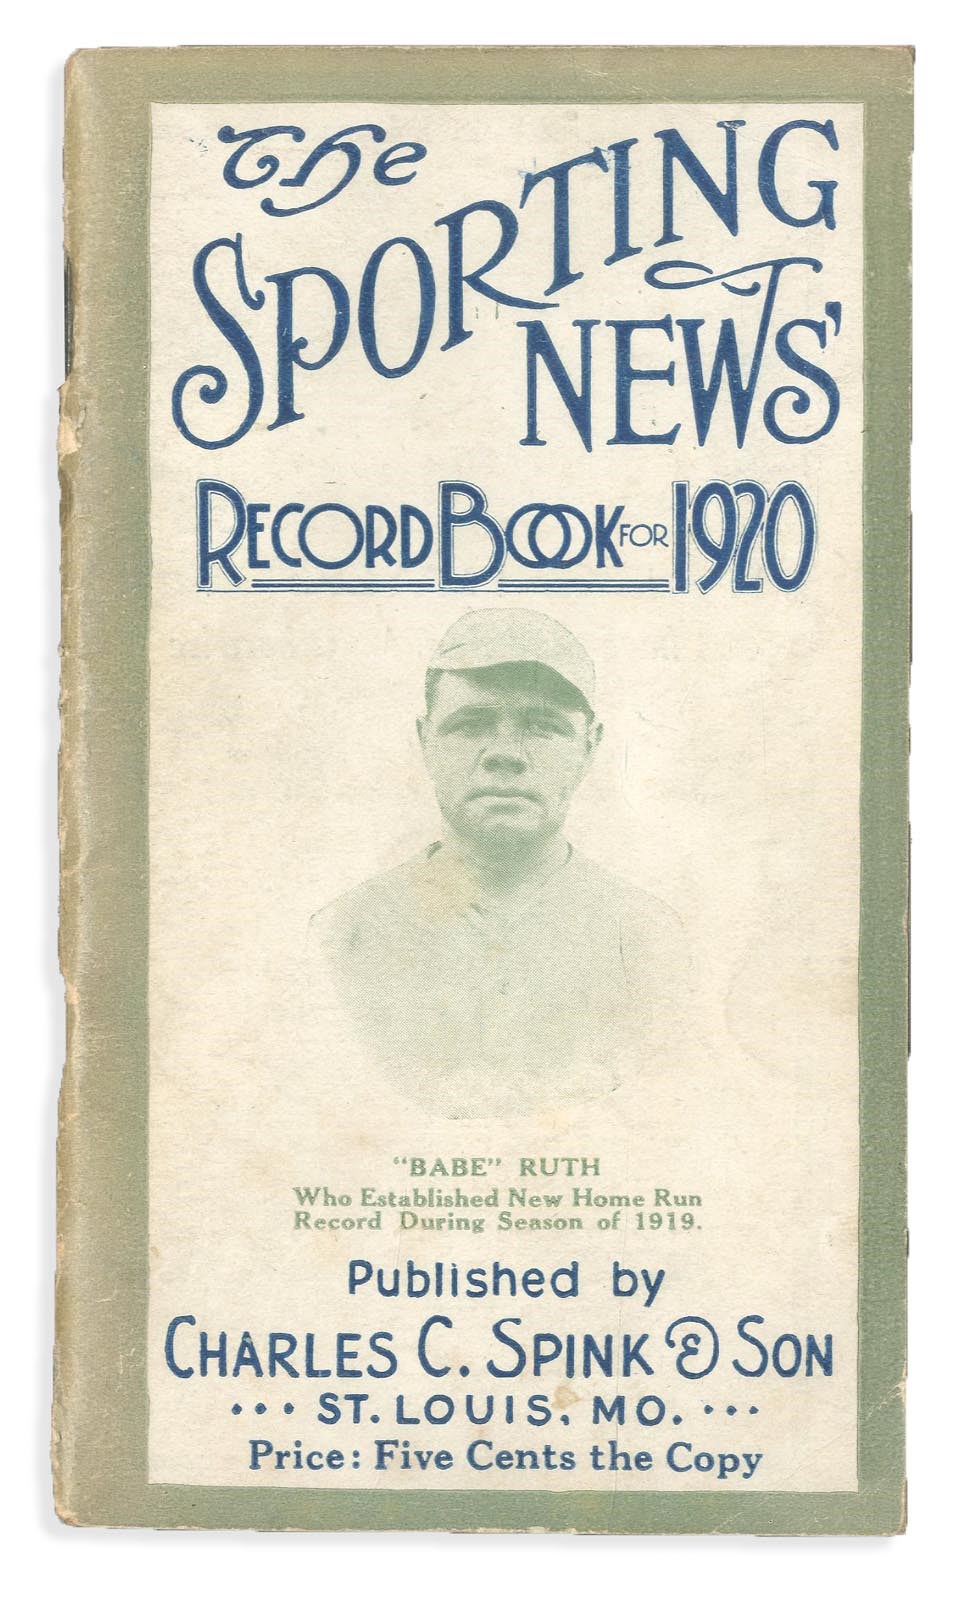 1920 Sporting News Record Book with Babe Ruth Cover